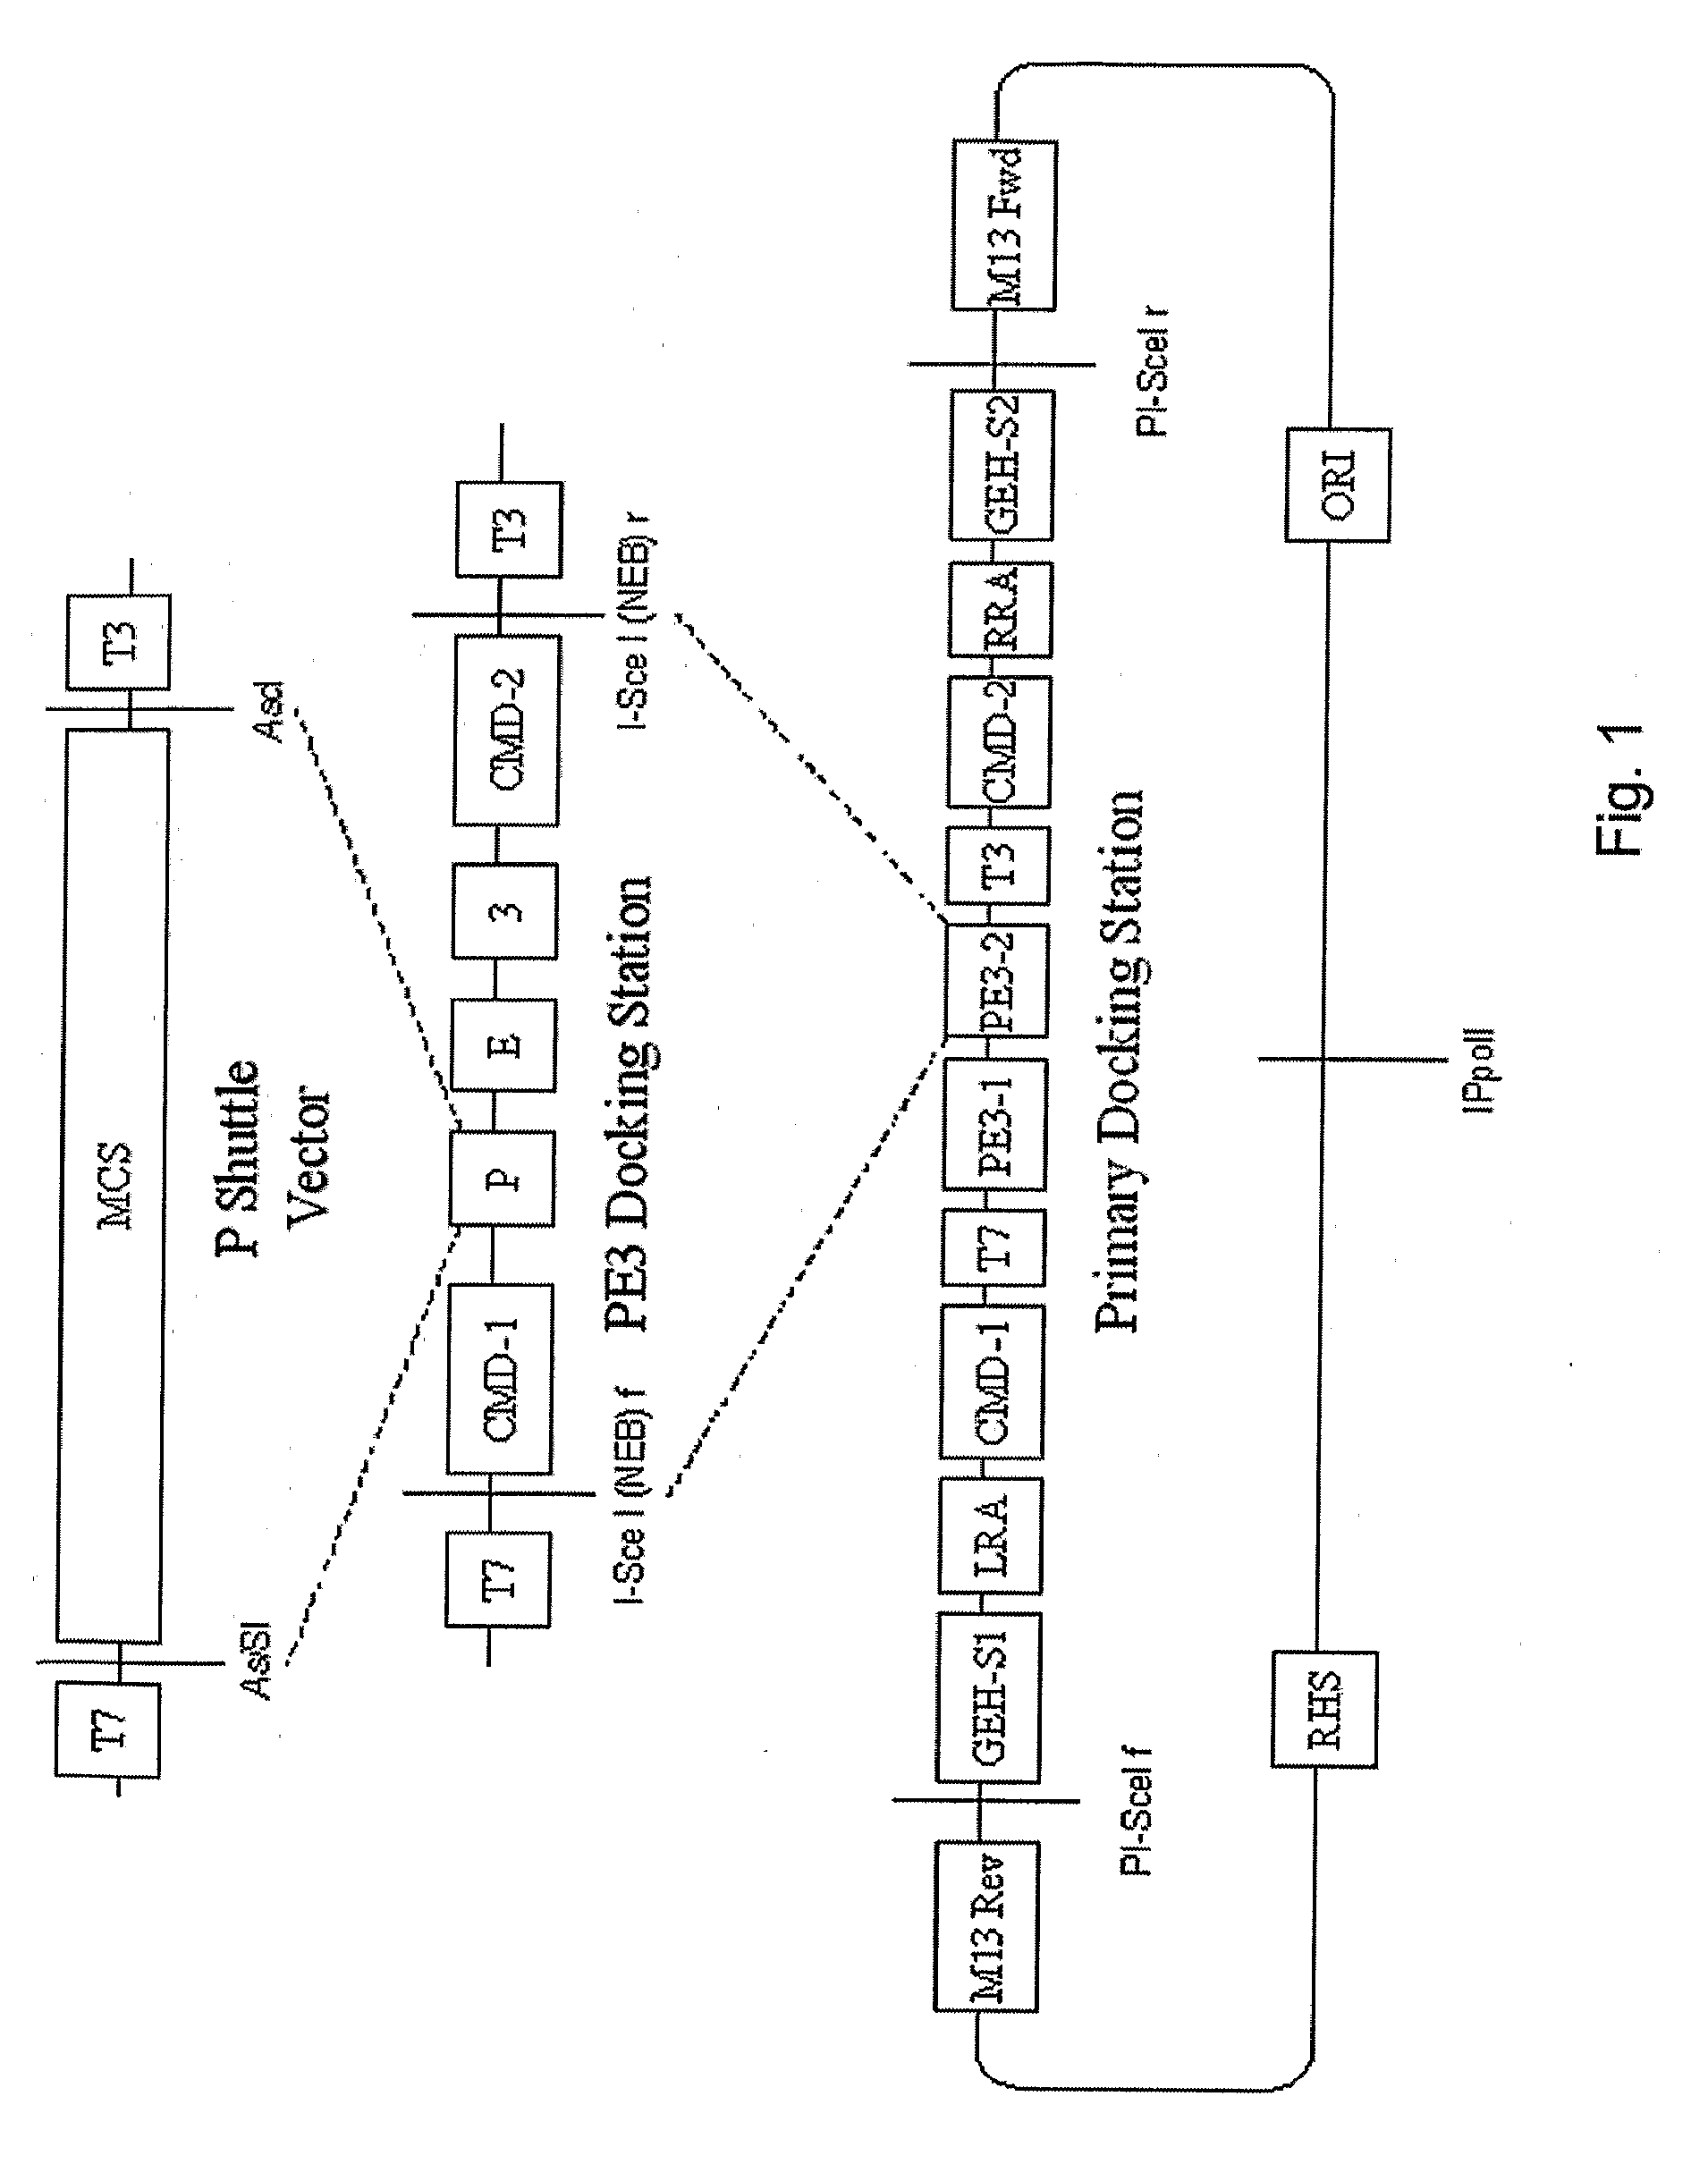 Methods for dynamic vector assembly of DNA cloning vector plasmids